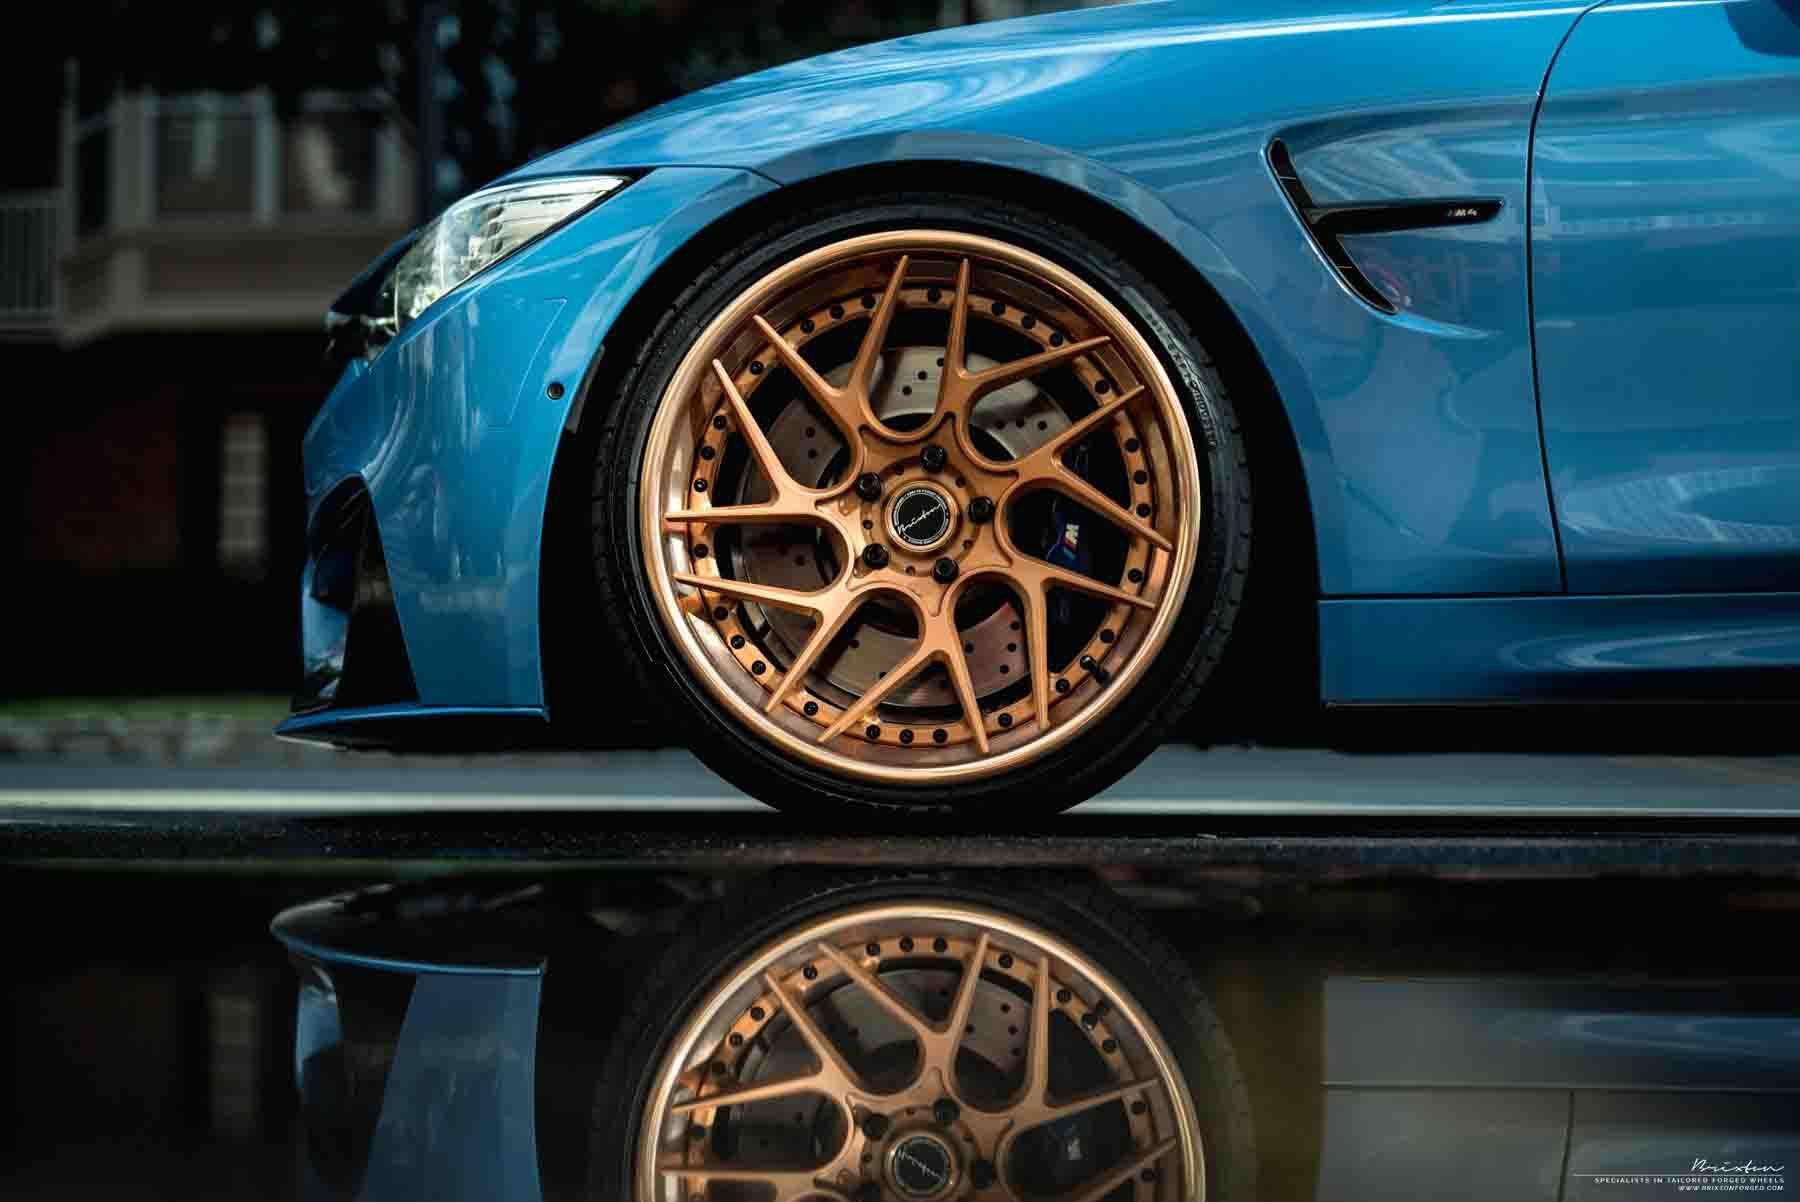 images-products-1-2608-232974896-yas-marina-blue-bmw-m4-f82-brixton-forged-cm7-targa-series-forged-concave-wheels-rose-gold-5-180.jpg